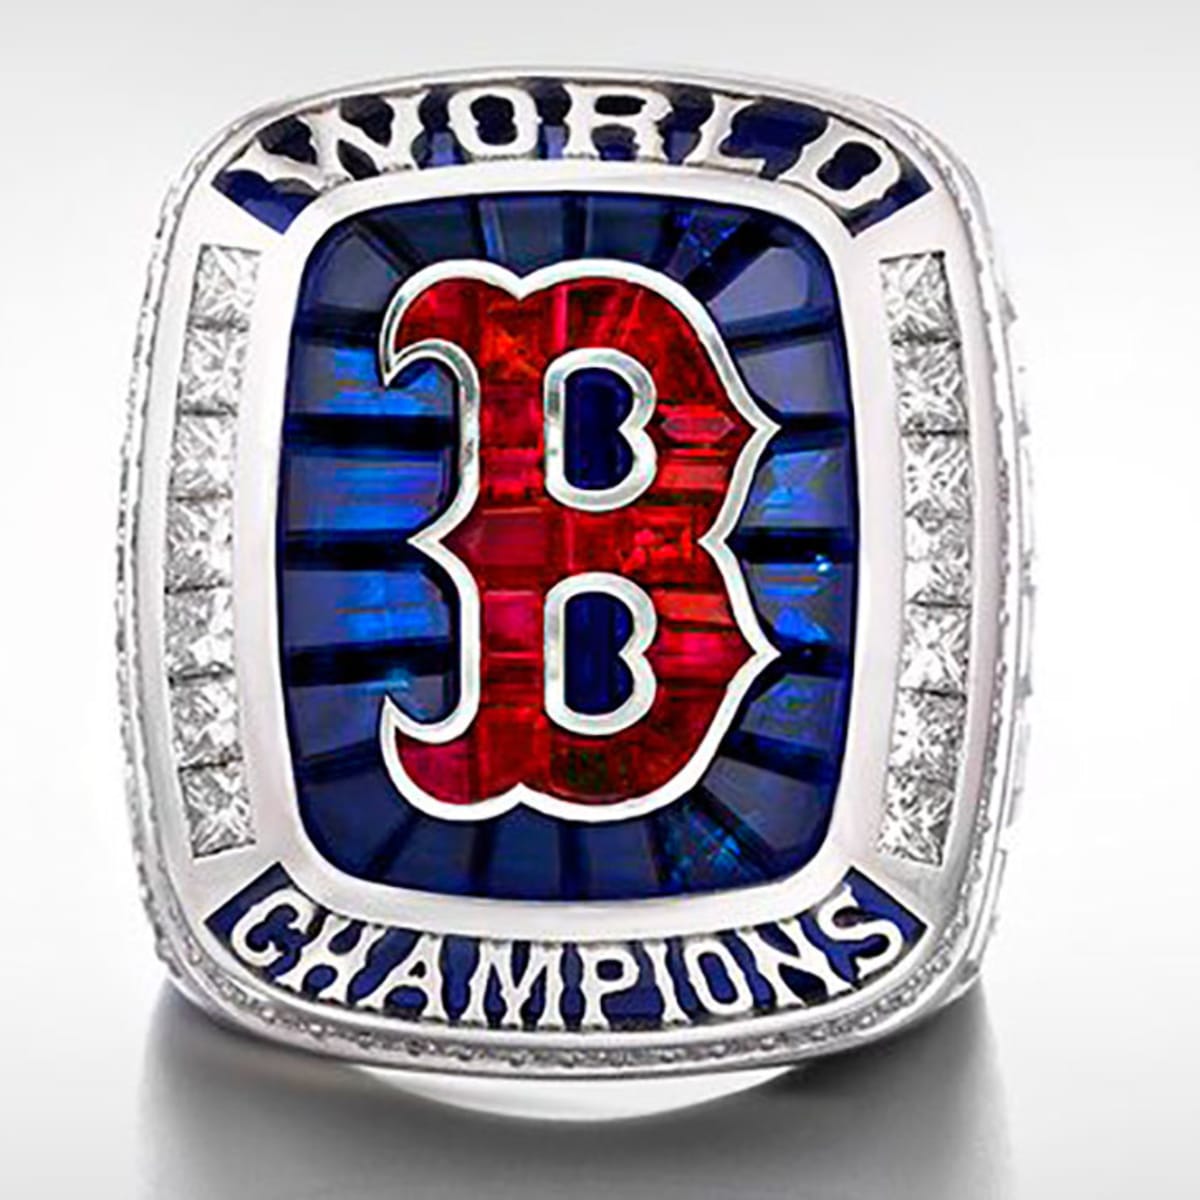 Red Sox receive World Series rings in pregame ceremony (photos) - Sports  Illustrated